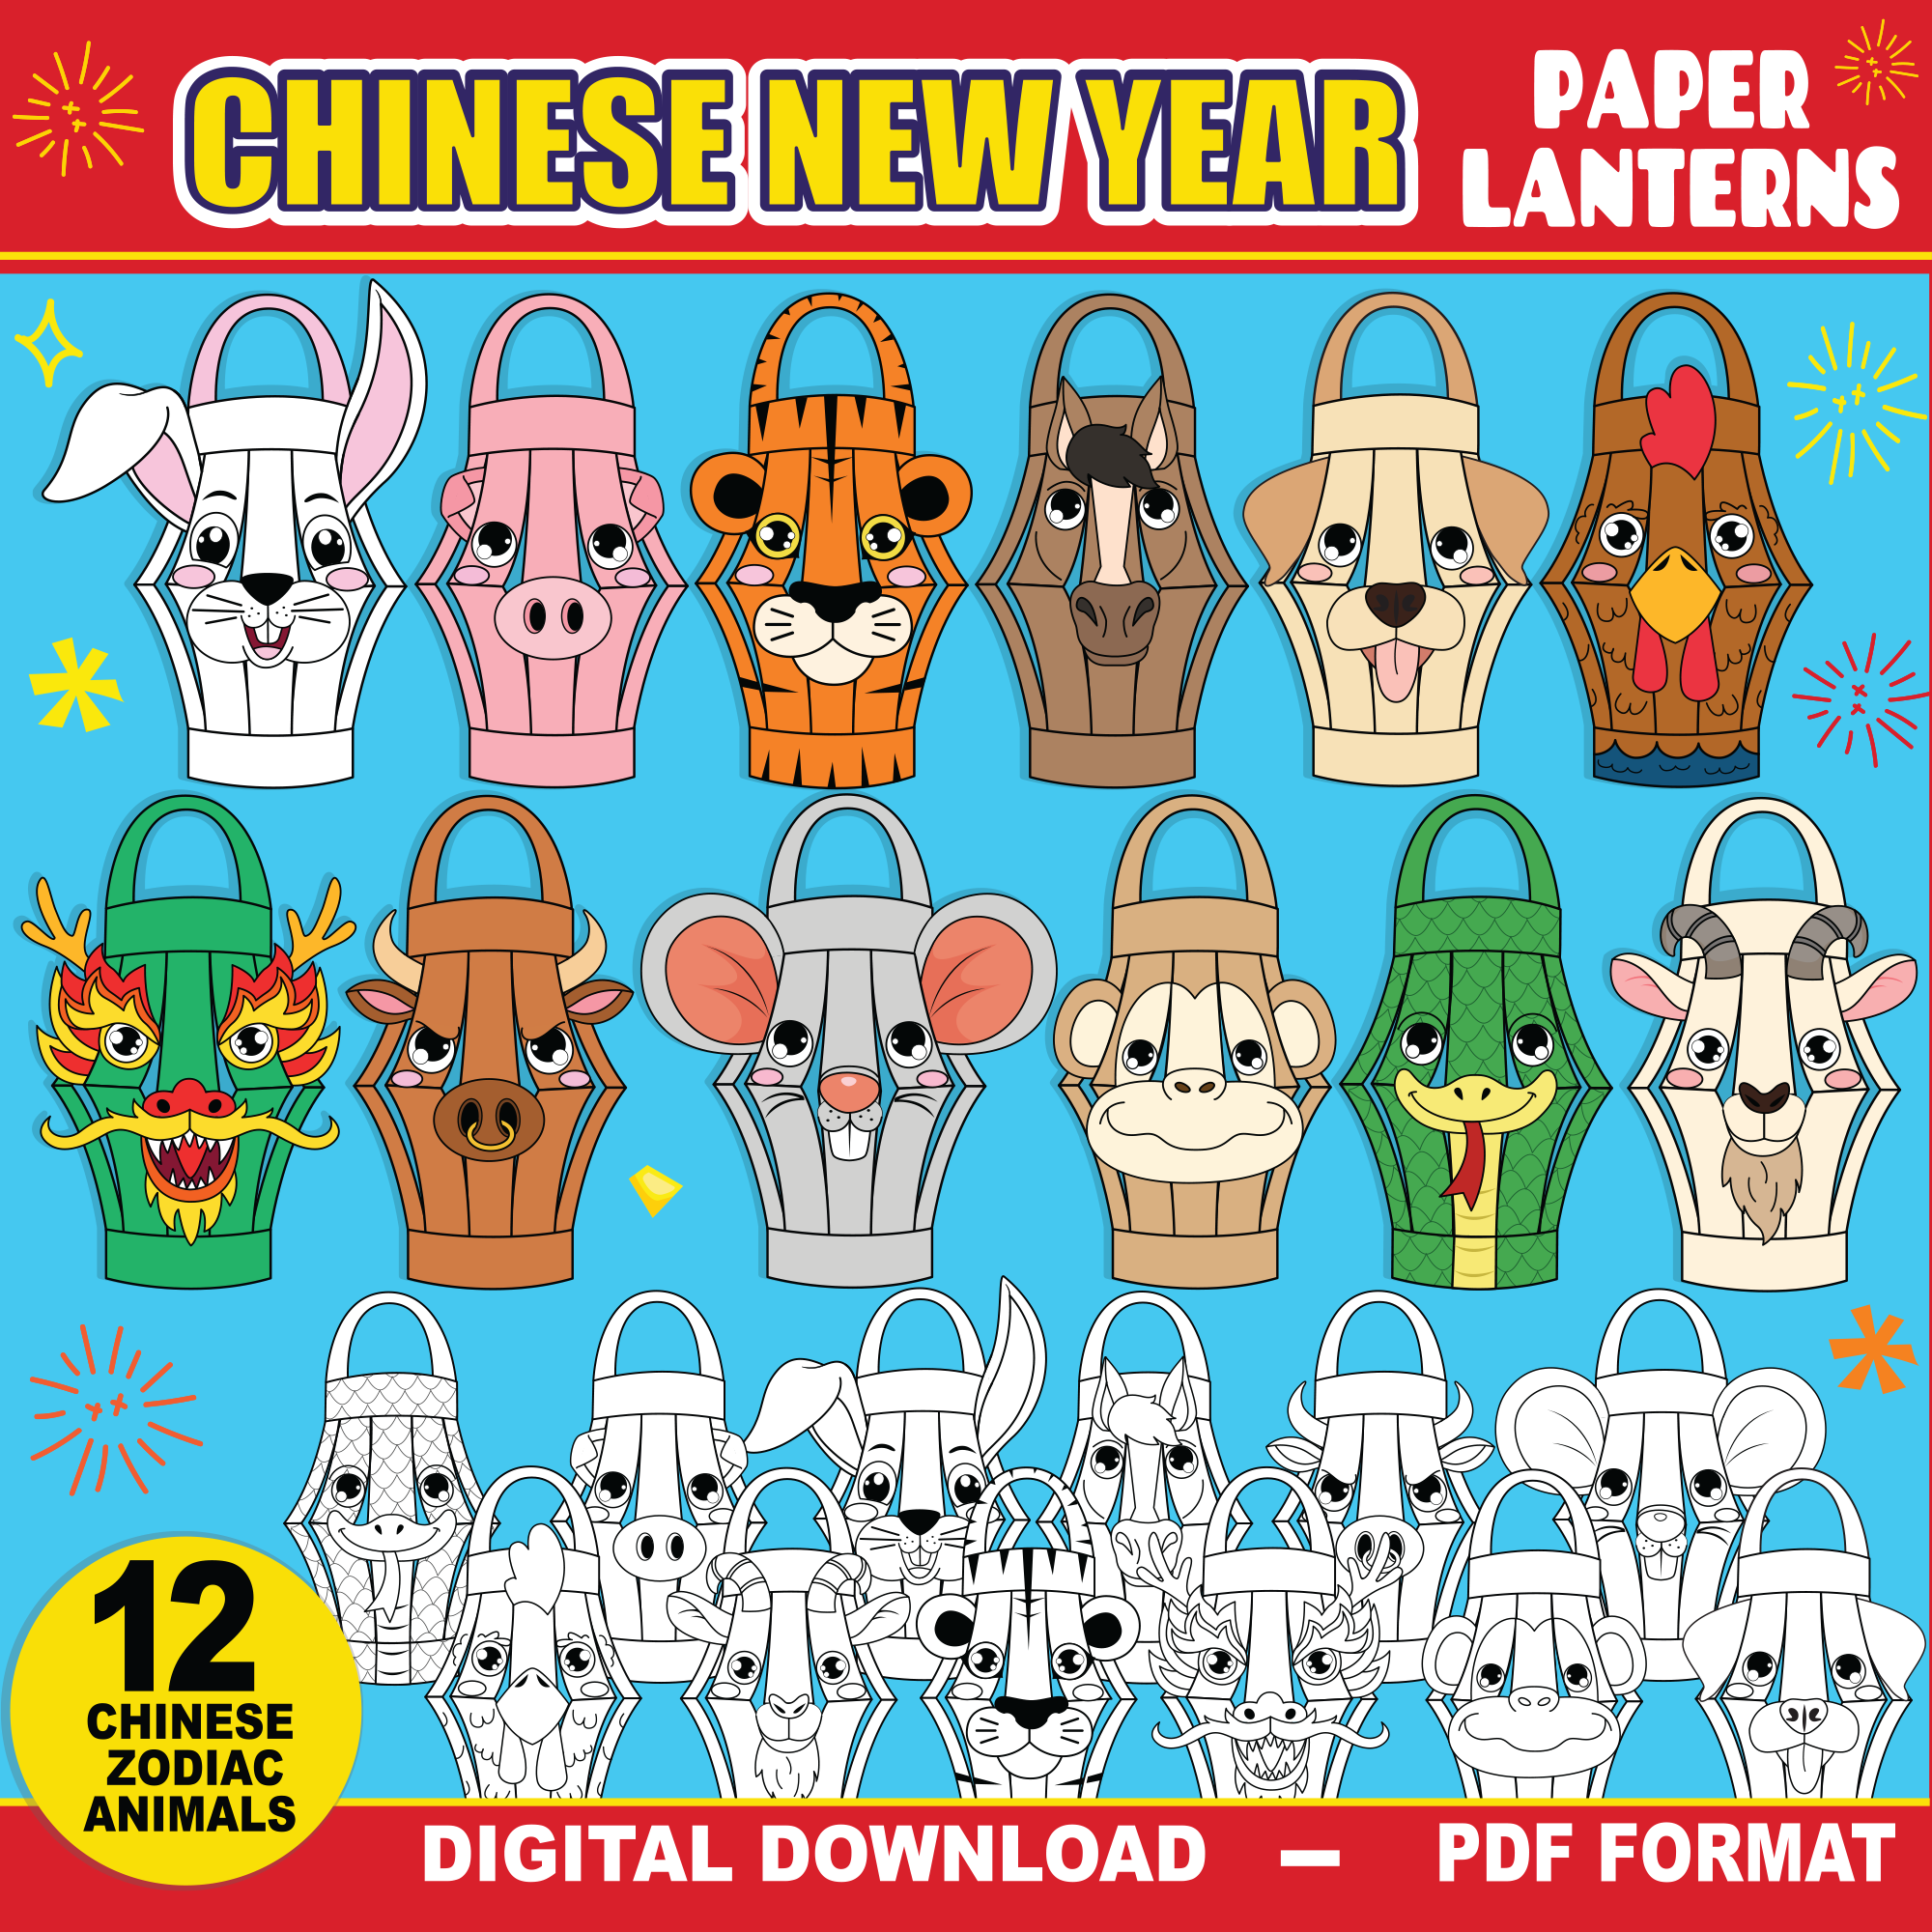 Early Learning Resources Chinese New Year Banner (Year Of The Snake)